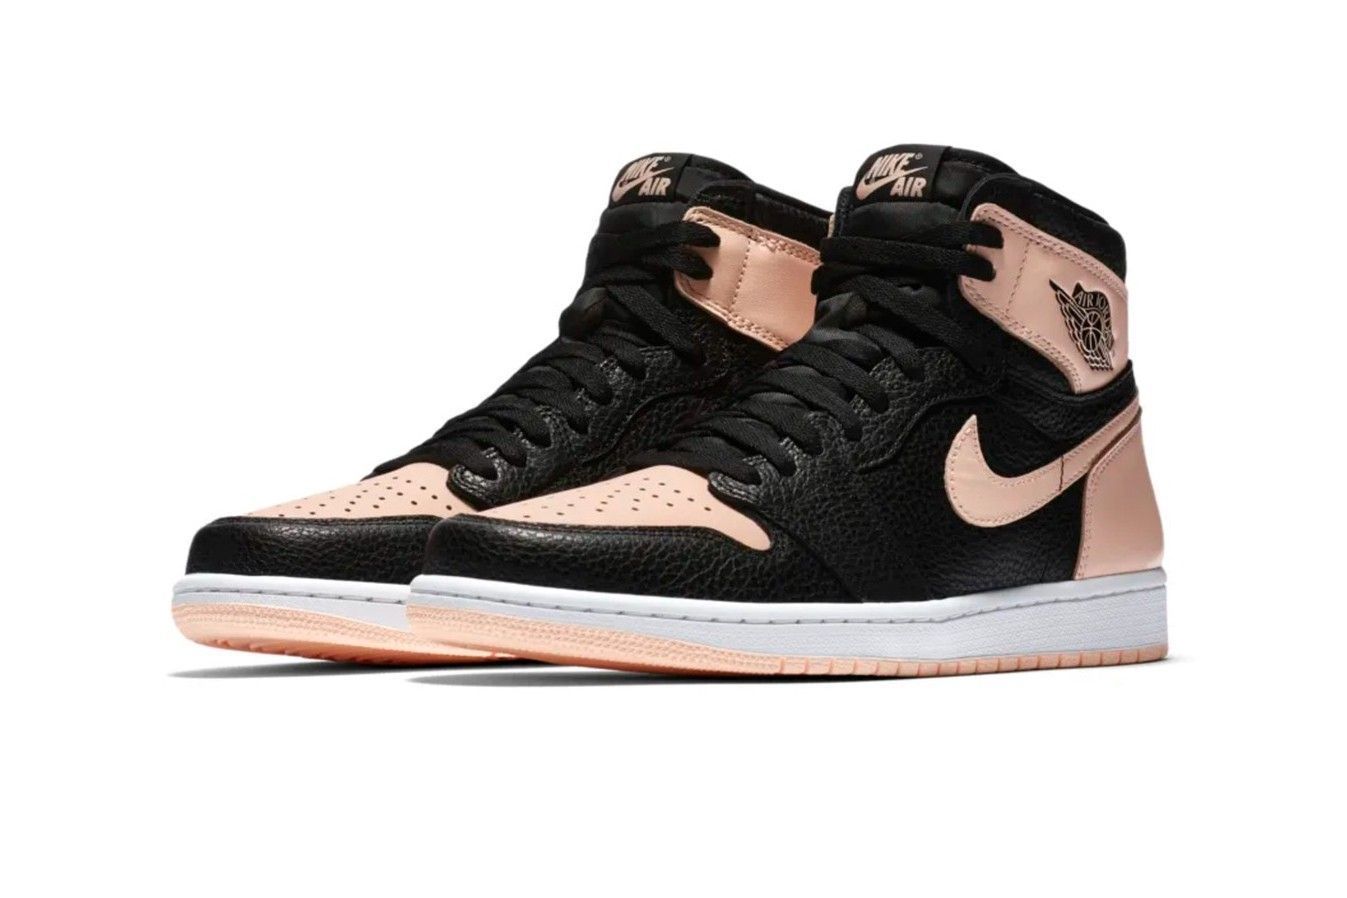 Purchase > air jordan rosa, Up to 74% OFF